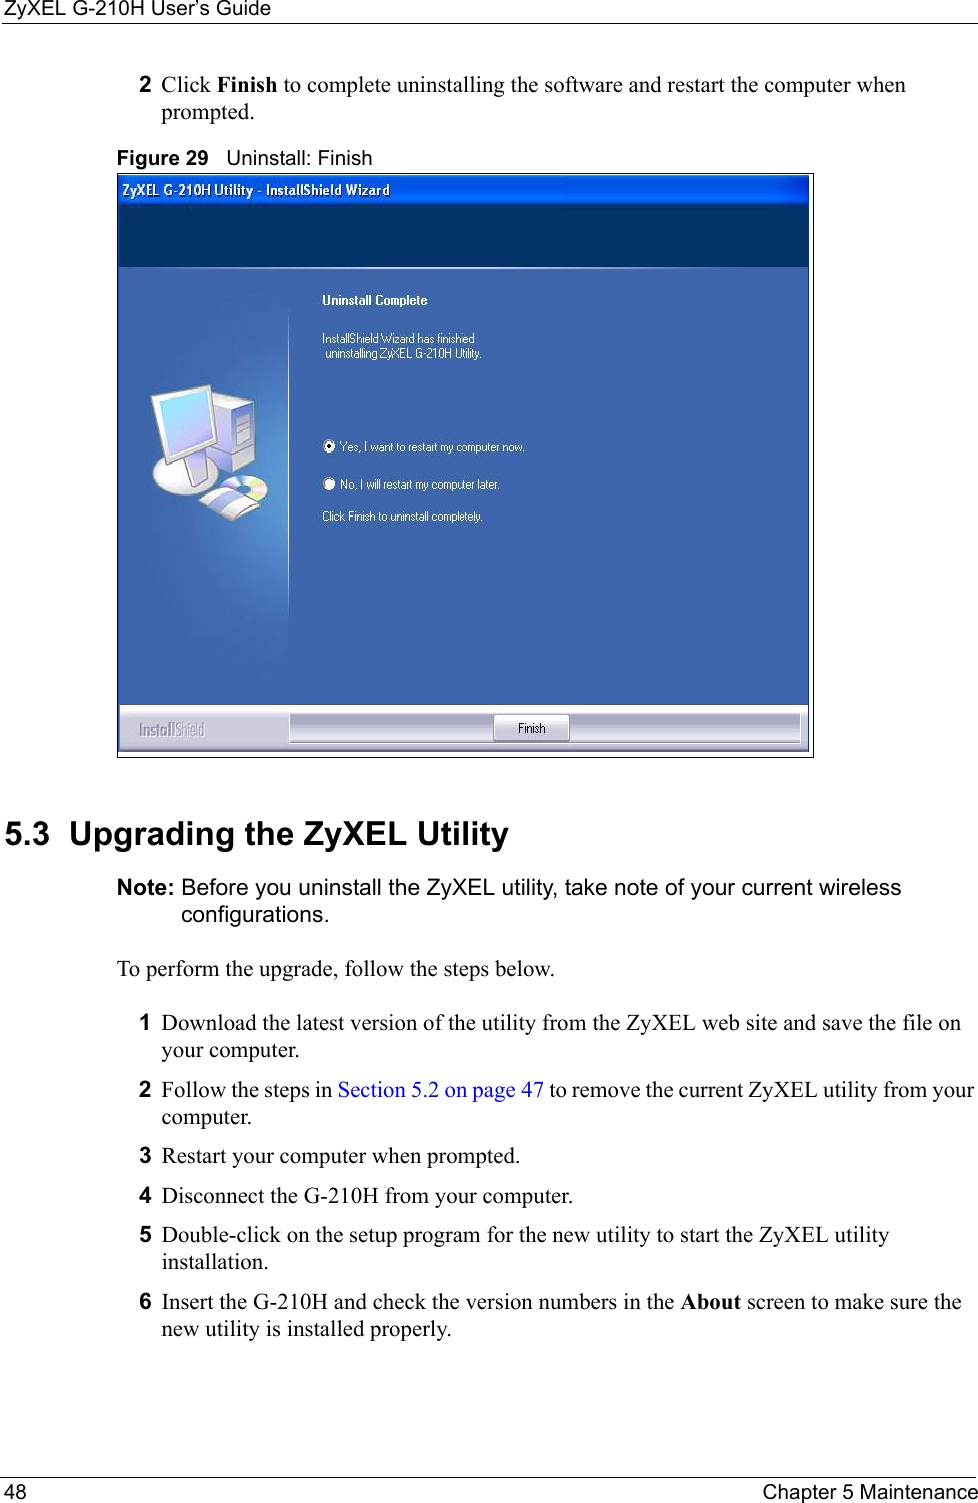 ZyXEL G-210H User’s Guide48 Chapter 5 Maintenance2Click Finish to complete uninstalling the software and restart the computer when prompted.Figure 29   Uninstall: Finish 5.3  Upgrading the ZyXEL Utility Note: Before you uninstall the ZyXEL utility, take note of your current wireless configurations.To perform the upgrade, follow the steps below.1Download the latest version of the utility from the ZyXEL web site and save the file on your computer.2Follow the steps in Section 5.2 on page 47 to remove the current ZyXEL utility from your computer.3Restart your computer when prompted.4Disconnect the G-210H from your computer.5Double-click on the setup program for the new utility to start the ZyXEL utility installation.6Insert the G-210H and check the version numbers in the About screen to make sure the new utility is installed properly.